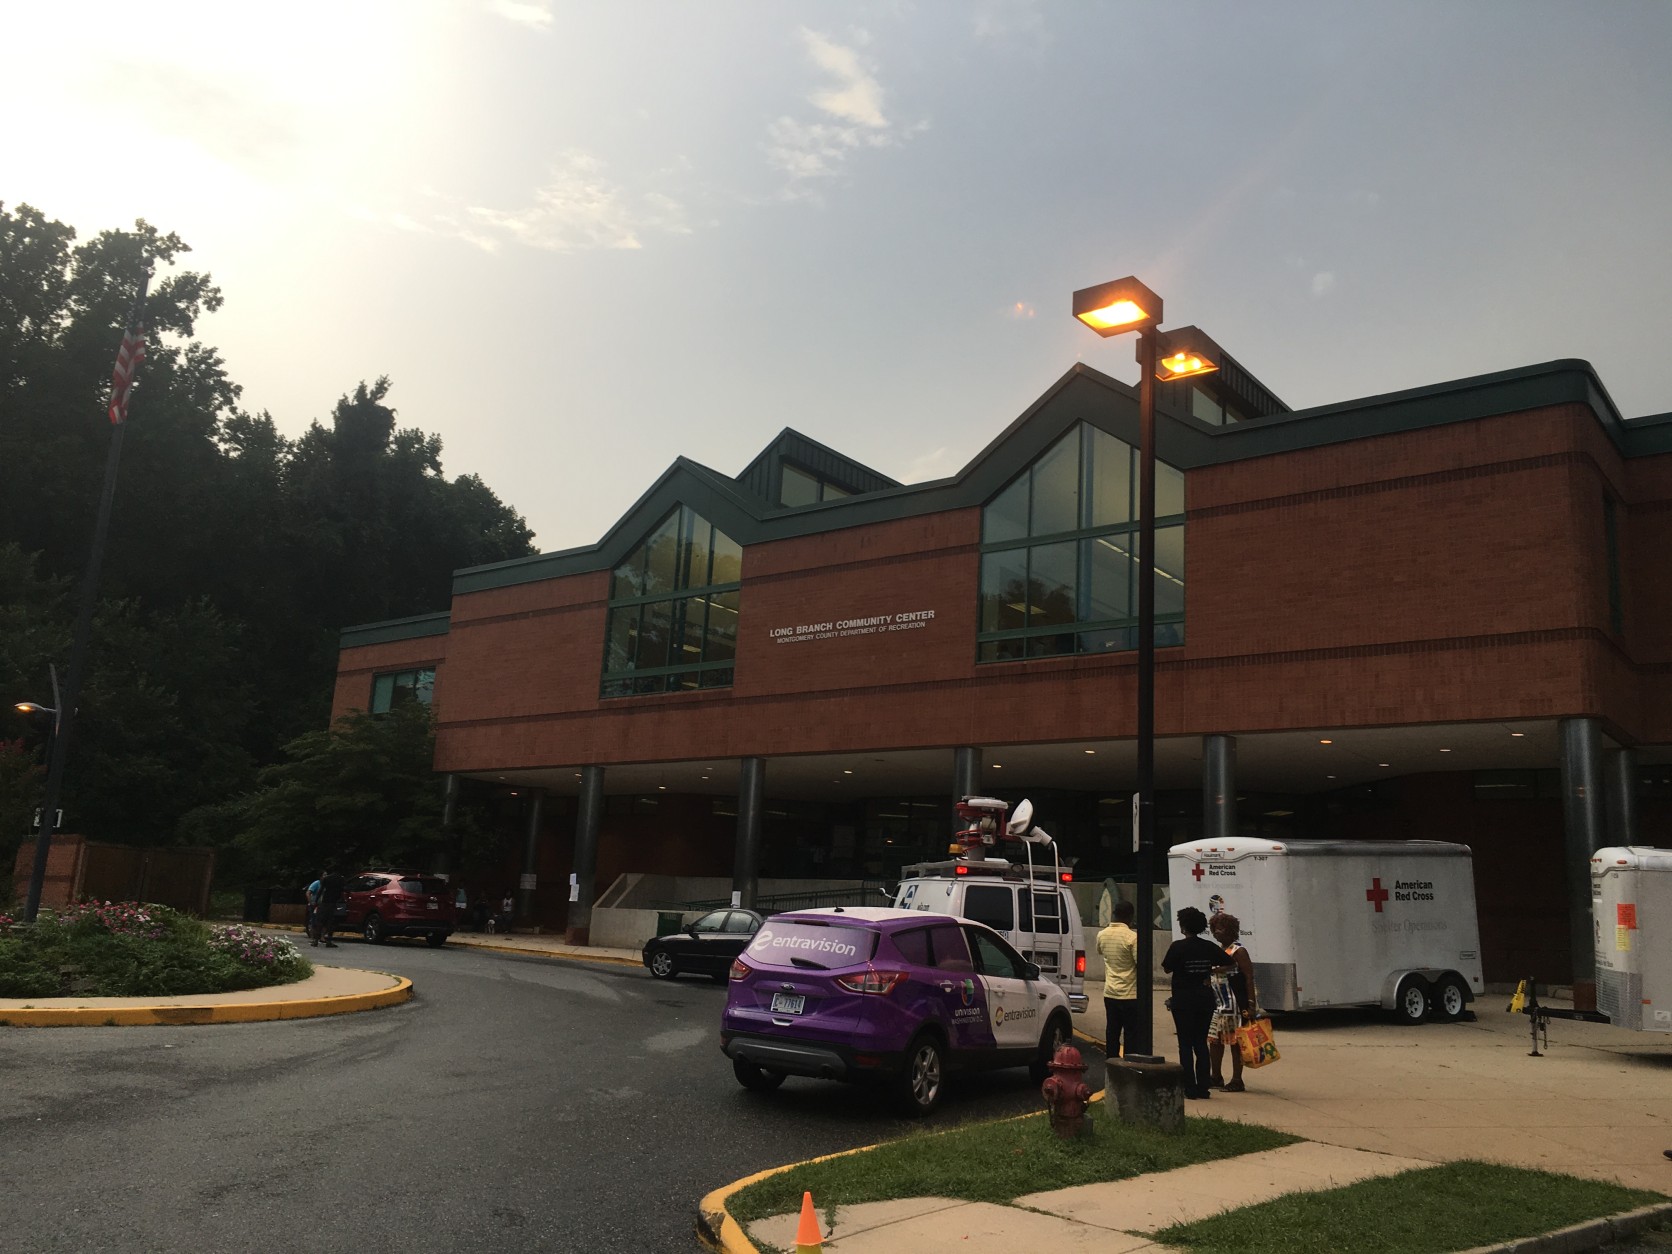 Long Branch Community Center provides temporary shelter for those affected by the Silver Spring apartment complex fire and explosion. (WTOP/Mike Murillo)